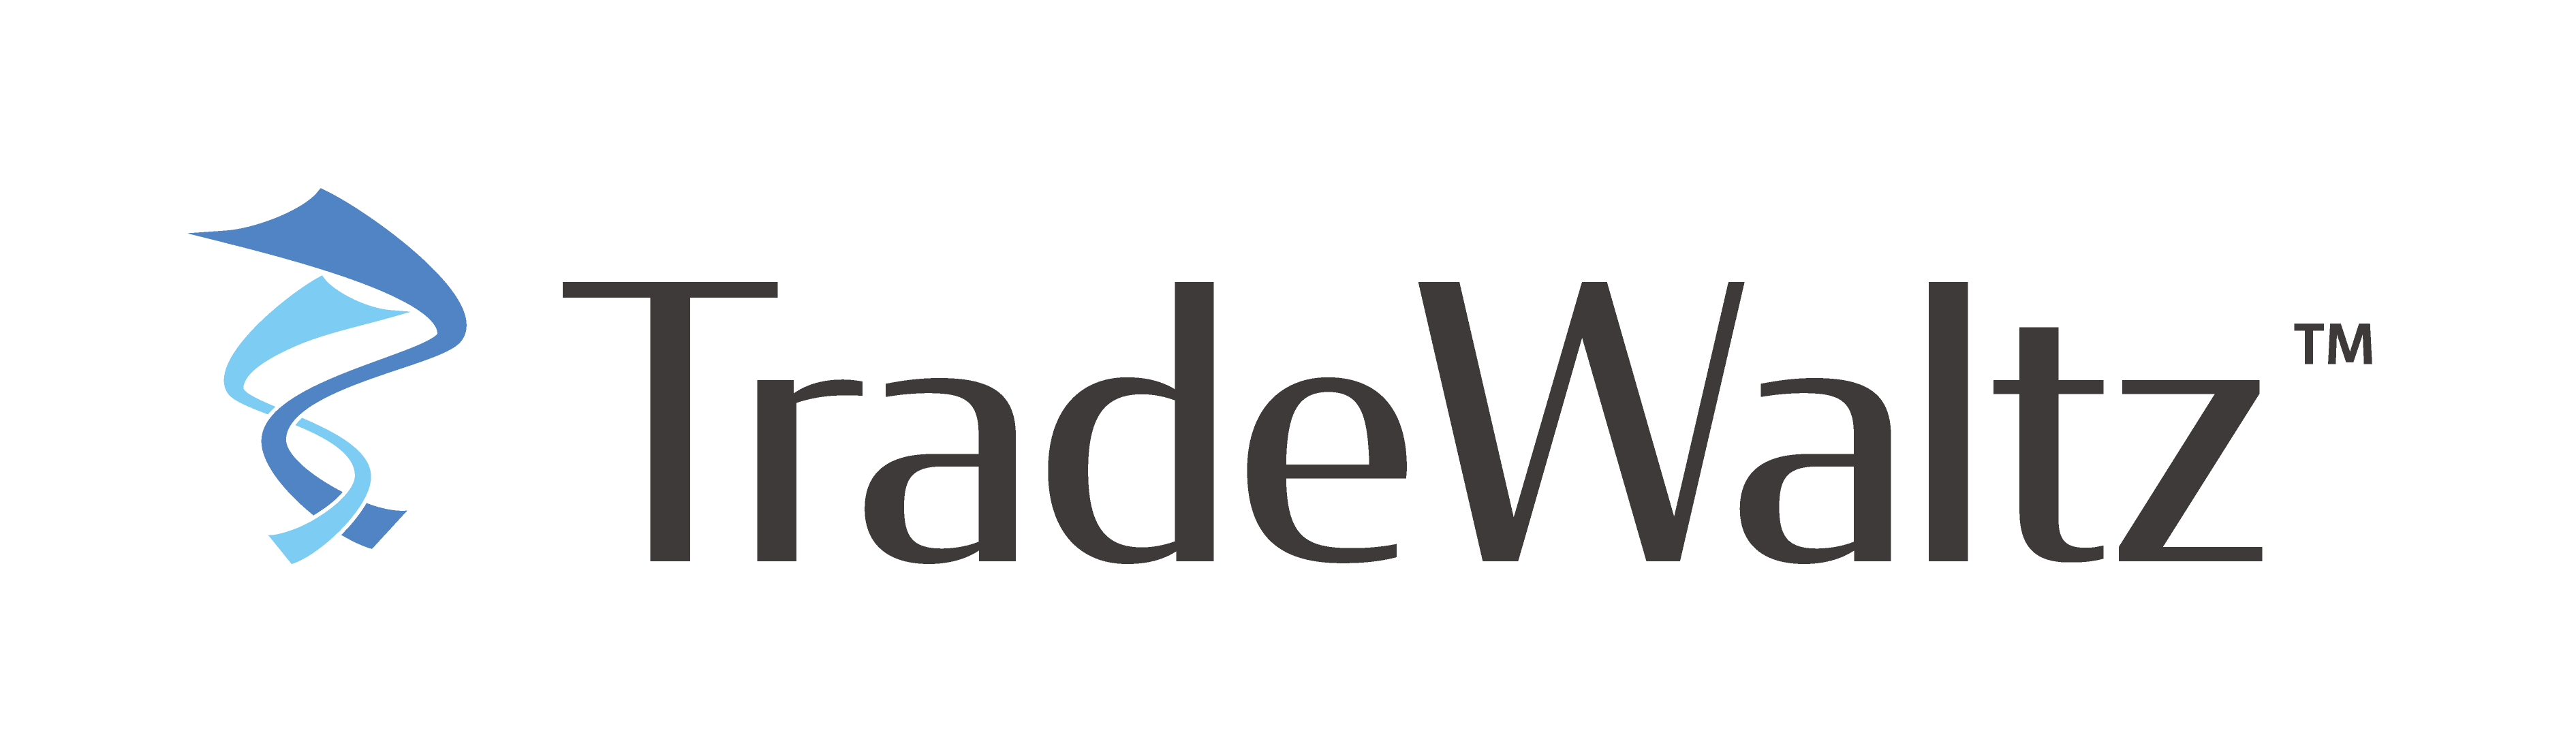 TradeWaltz has been listed as a solution partner of Zeroboard, a solution provider for measuring and visualizing CO2 emissions.